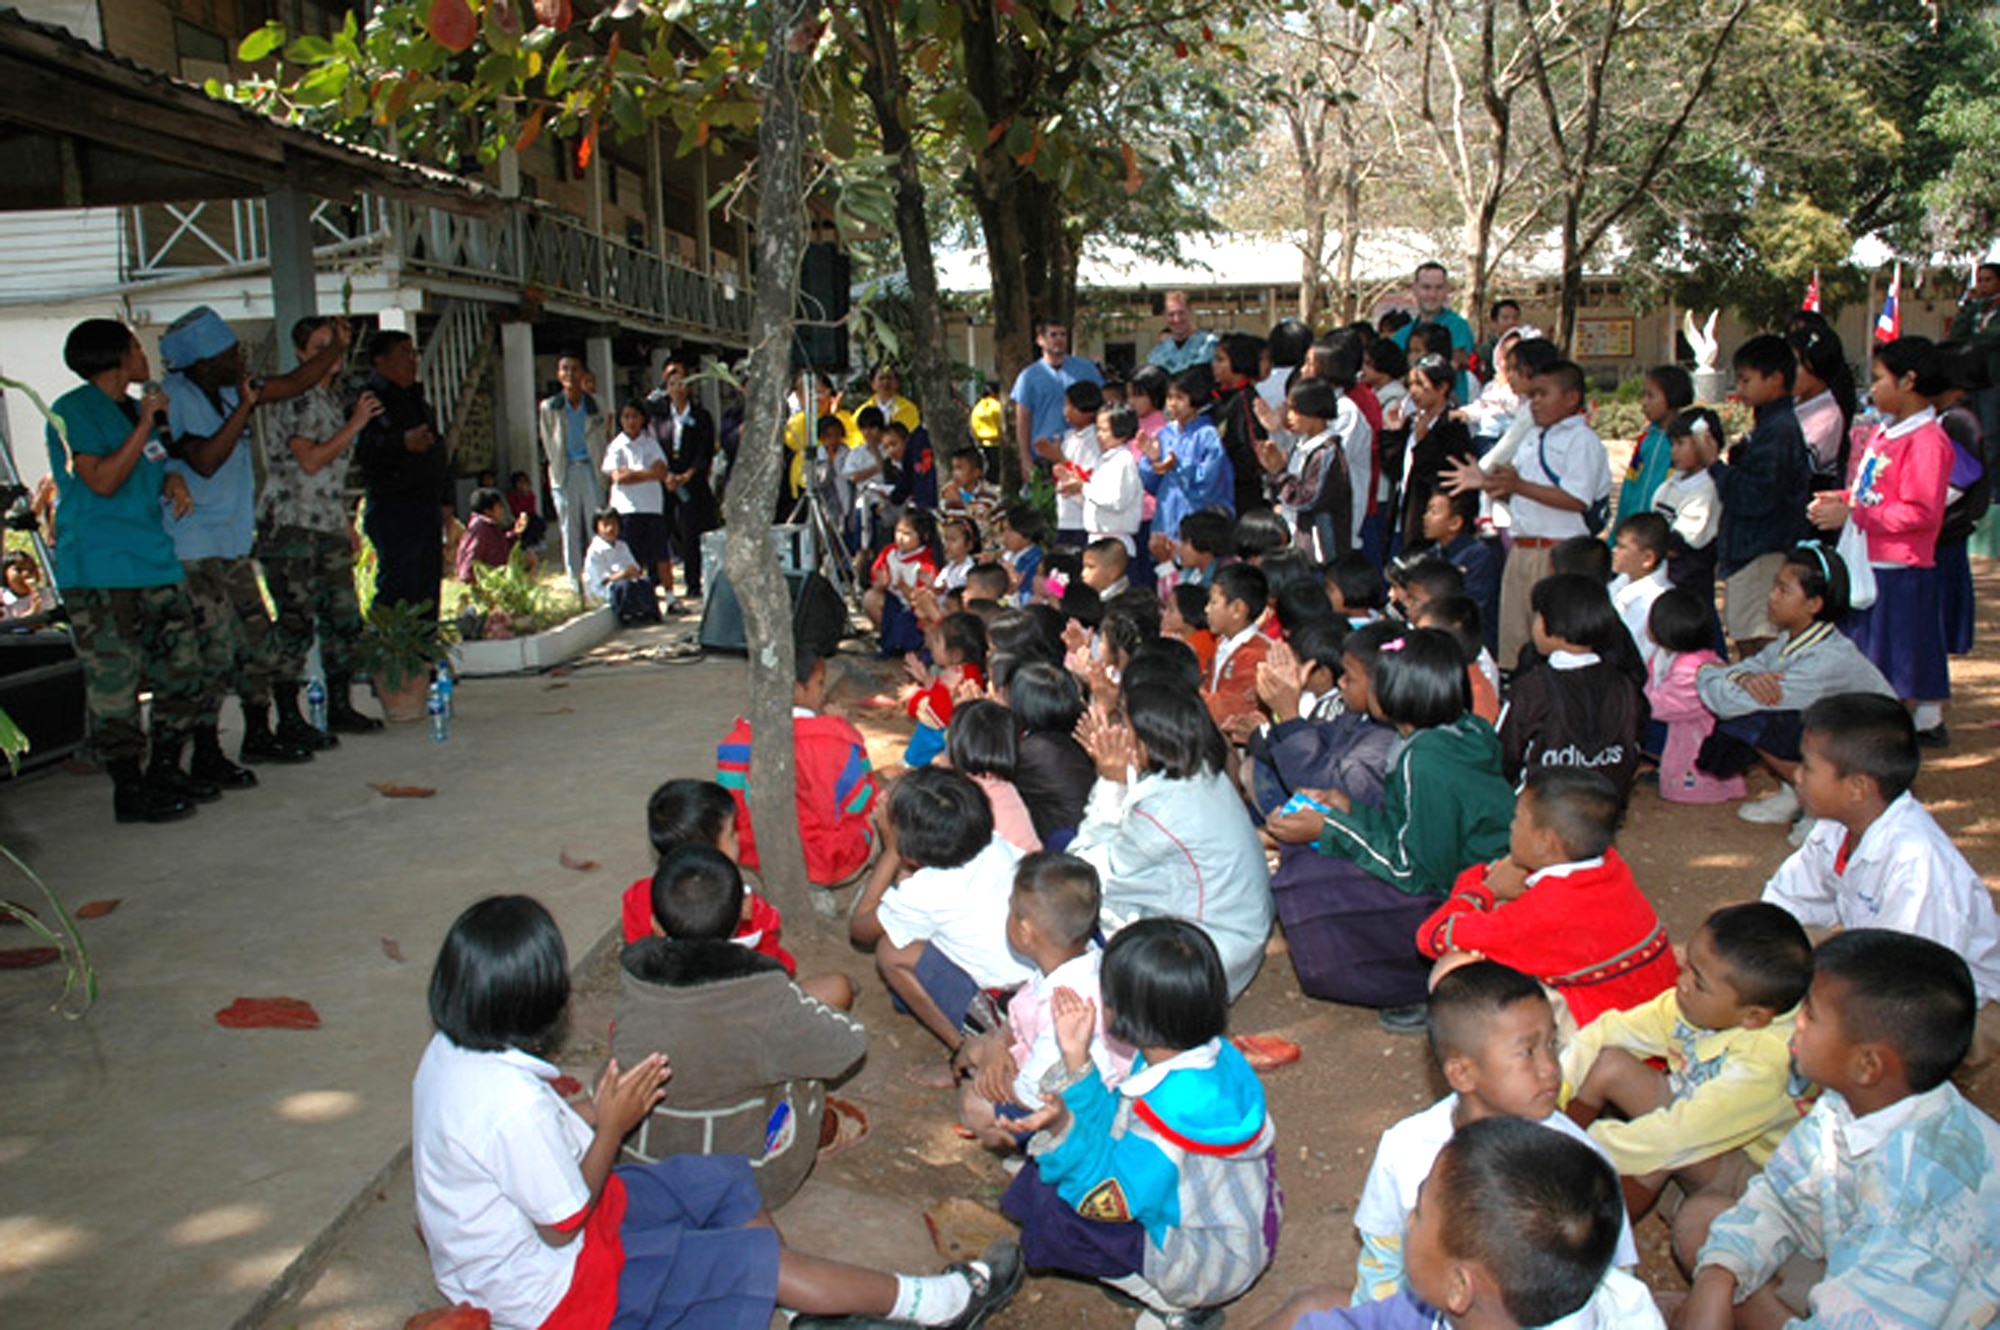 The U.S. dental staff takes time out of the day to entertain students of the Ban Chaimongkon school Jan. 30 in Korat, Thailand. Medical members from the United States, Thailand and Singapore air forces performed medical, dental and eye exams for members of the school community. Military members from the three countries took part in a humanitarian mission at the school as part of Exercise Cope Tiger 2007. (U.S. Air Force photo/Staff Sgt. Betty Squatrito-Martin) 